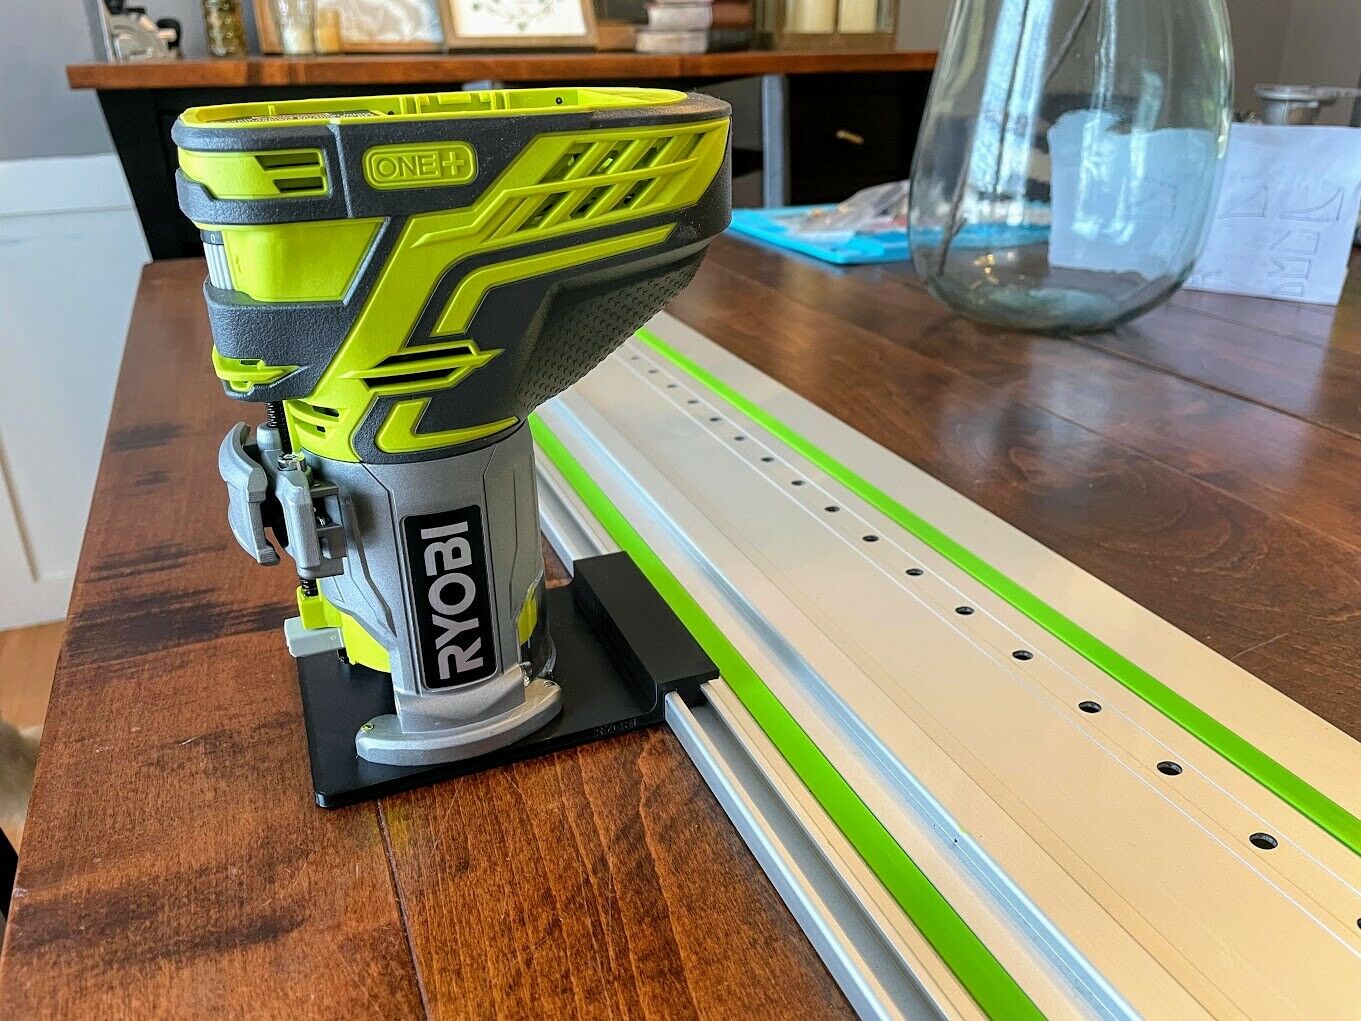 How To Change Bit On Ryobi Router